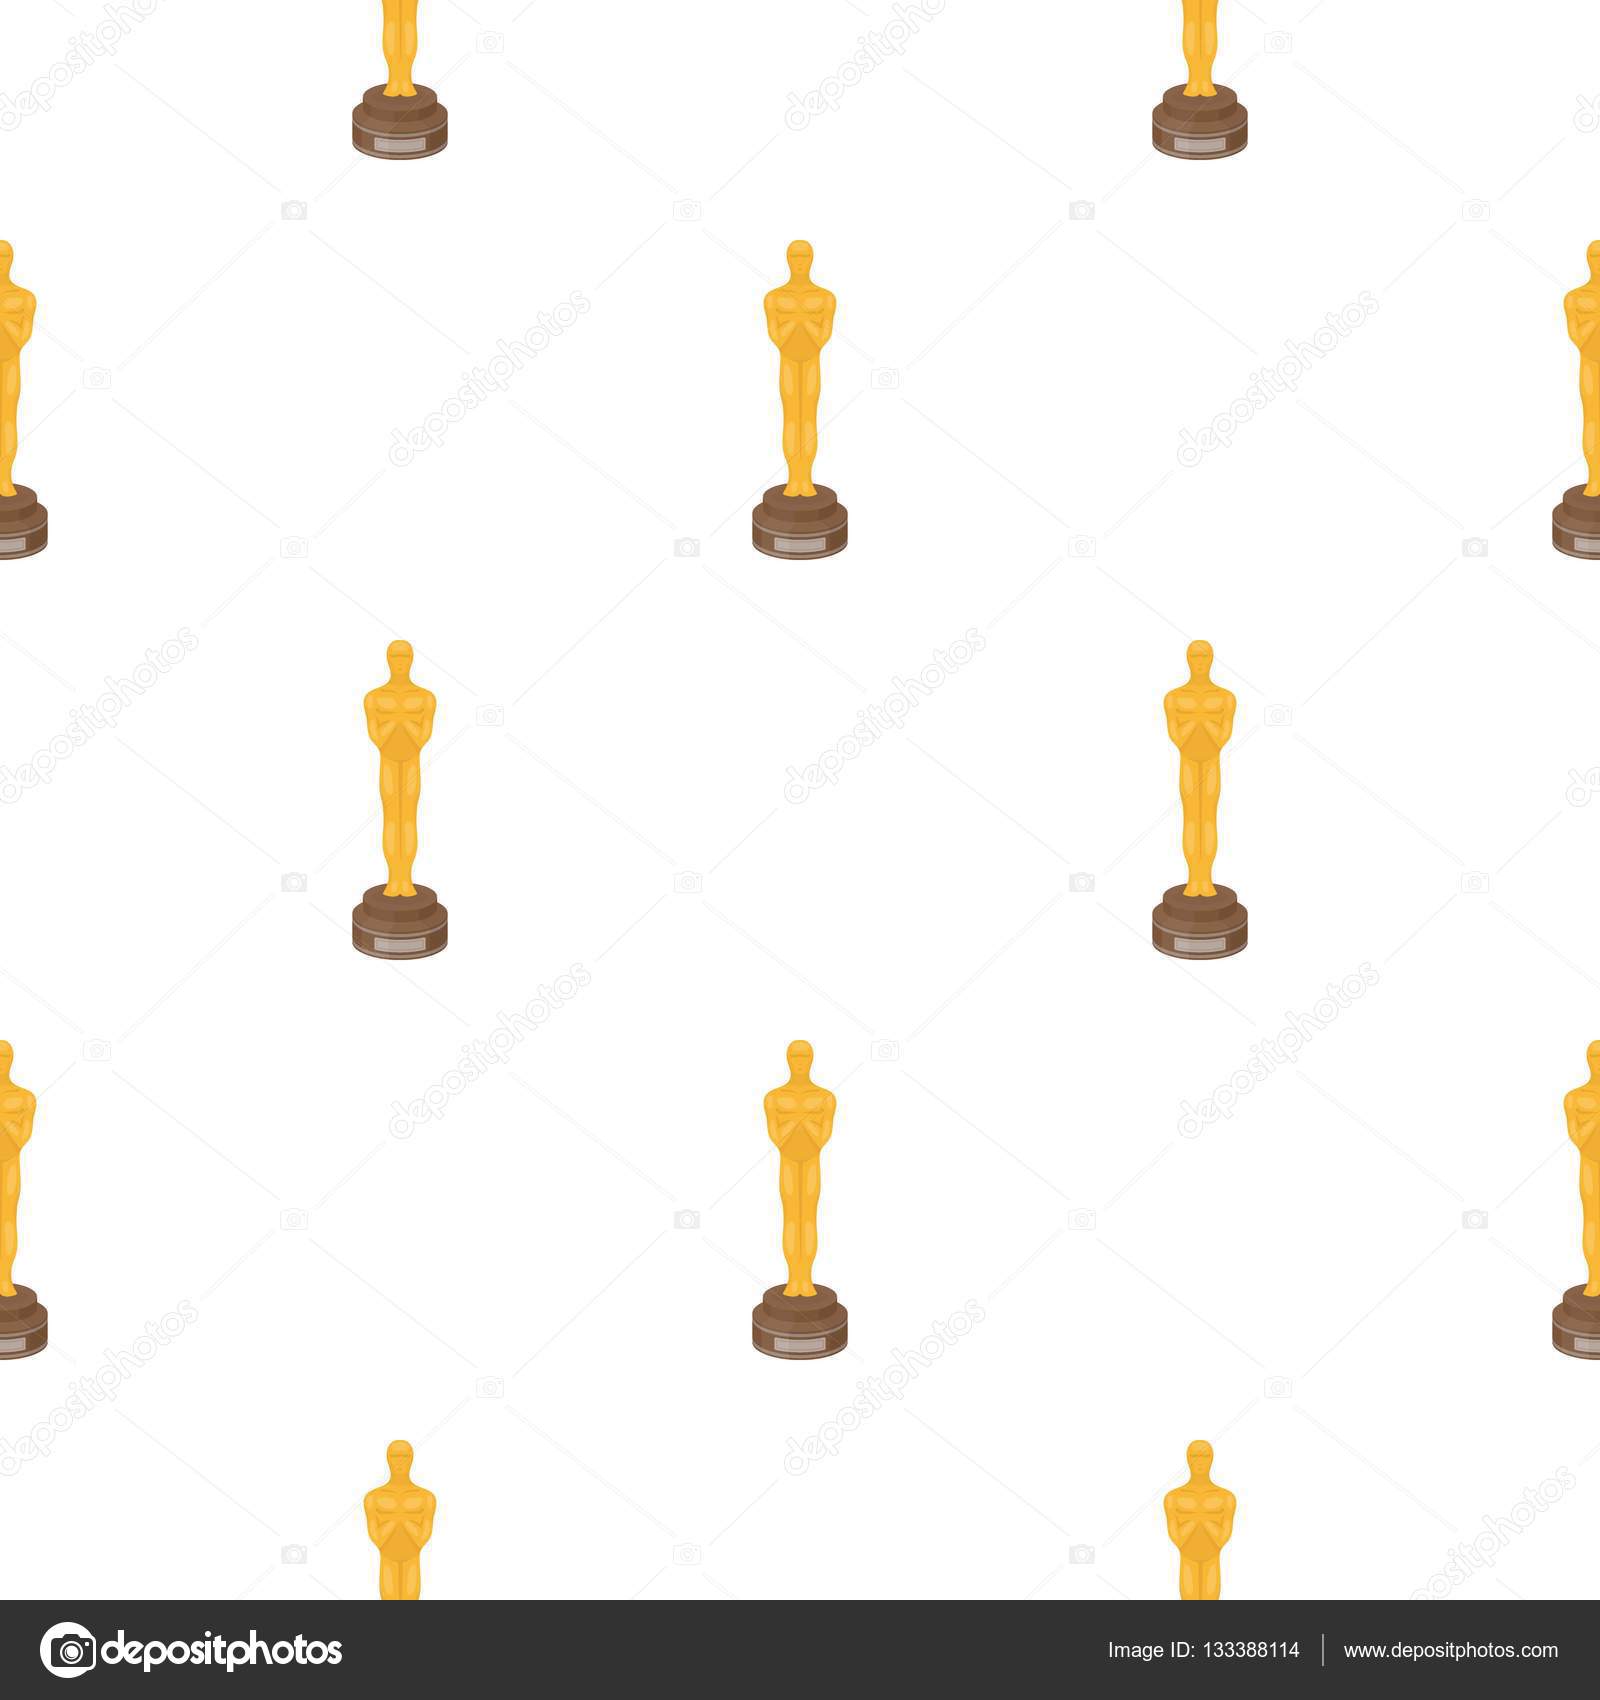 Academy award icon in cartoon style isolated on white background. Films and  cinema symbol stock vector illustration. Stock Vector Image by ©PandaVector  #133388114